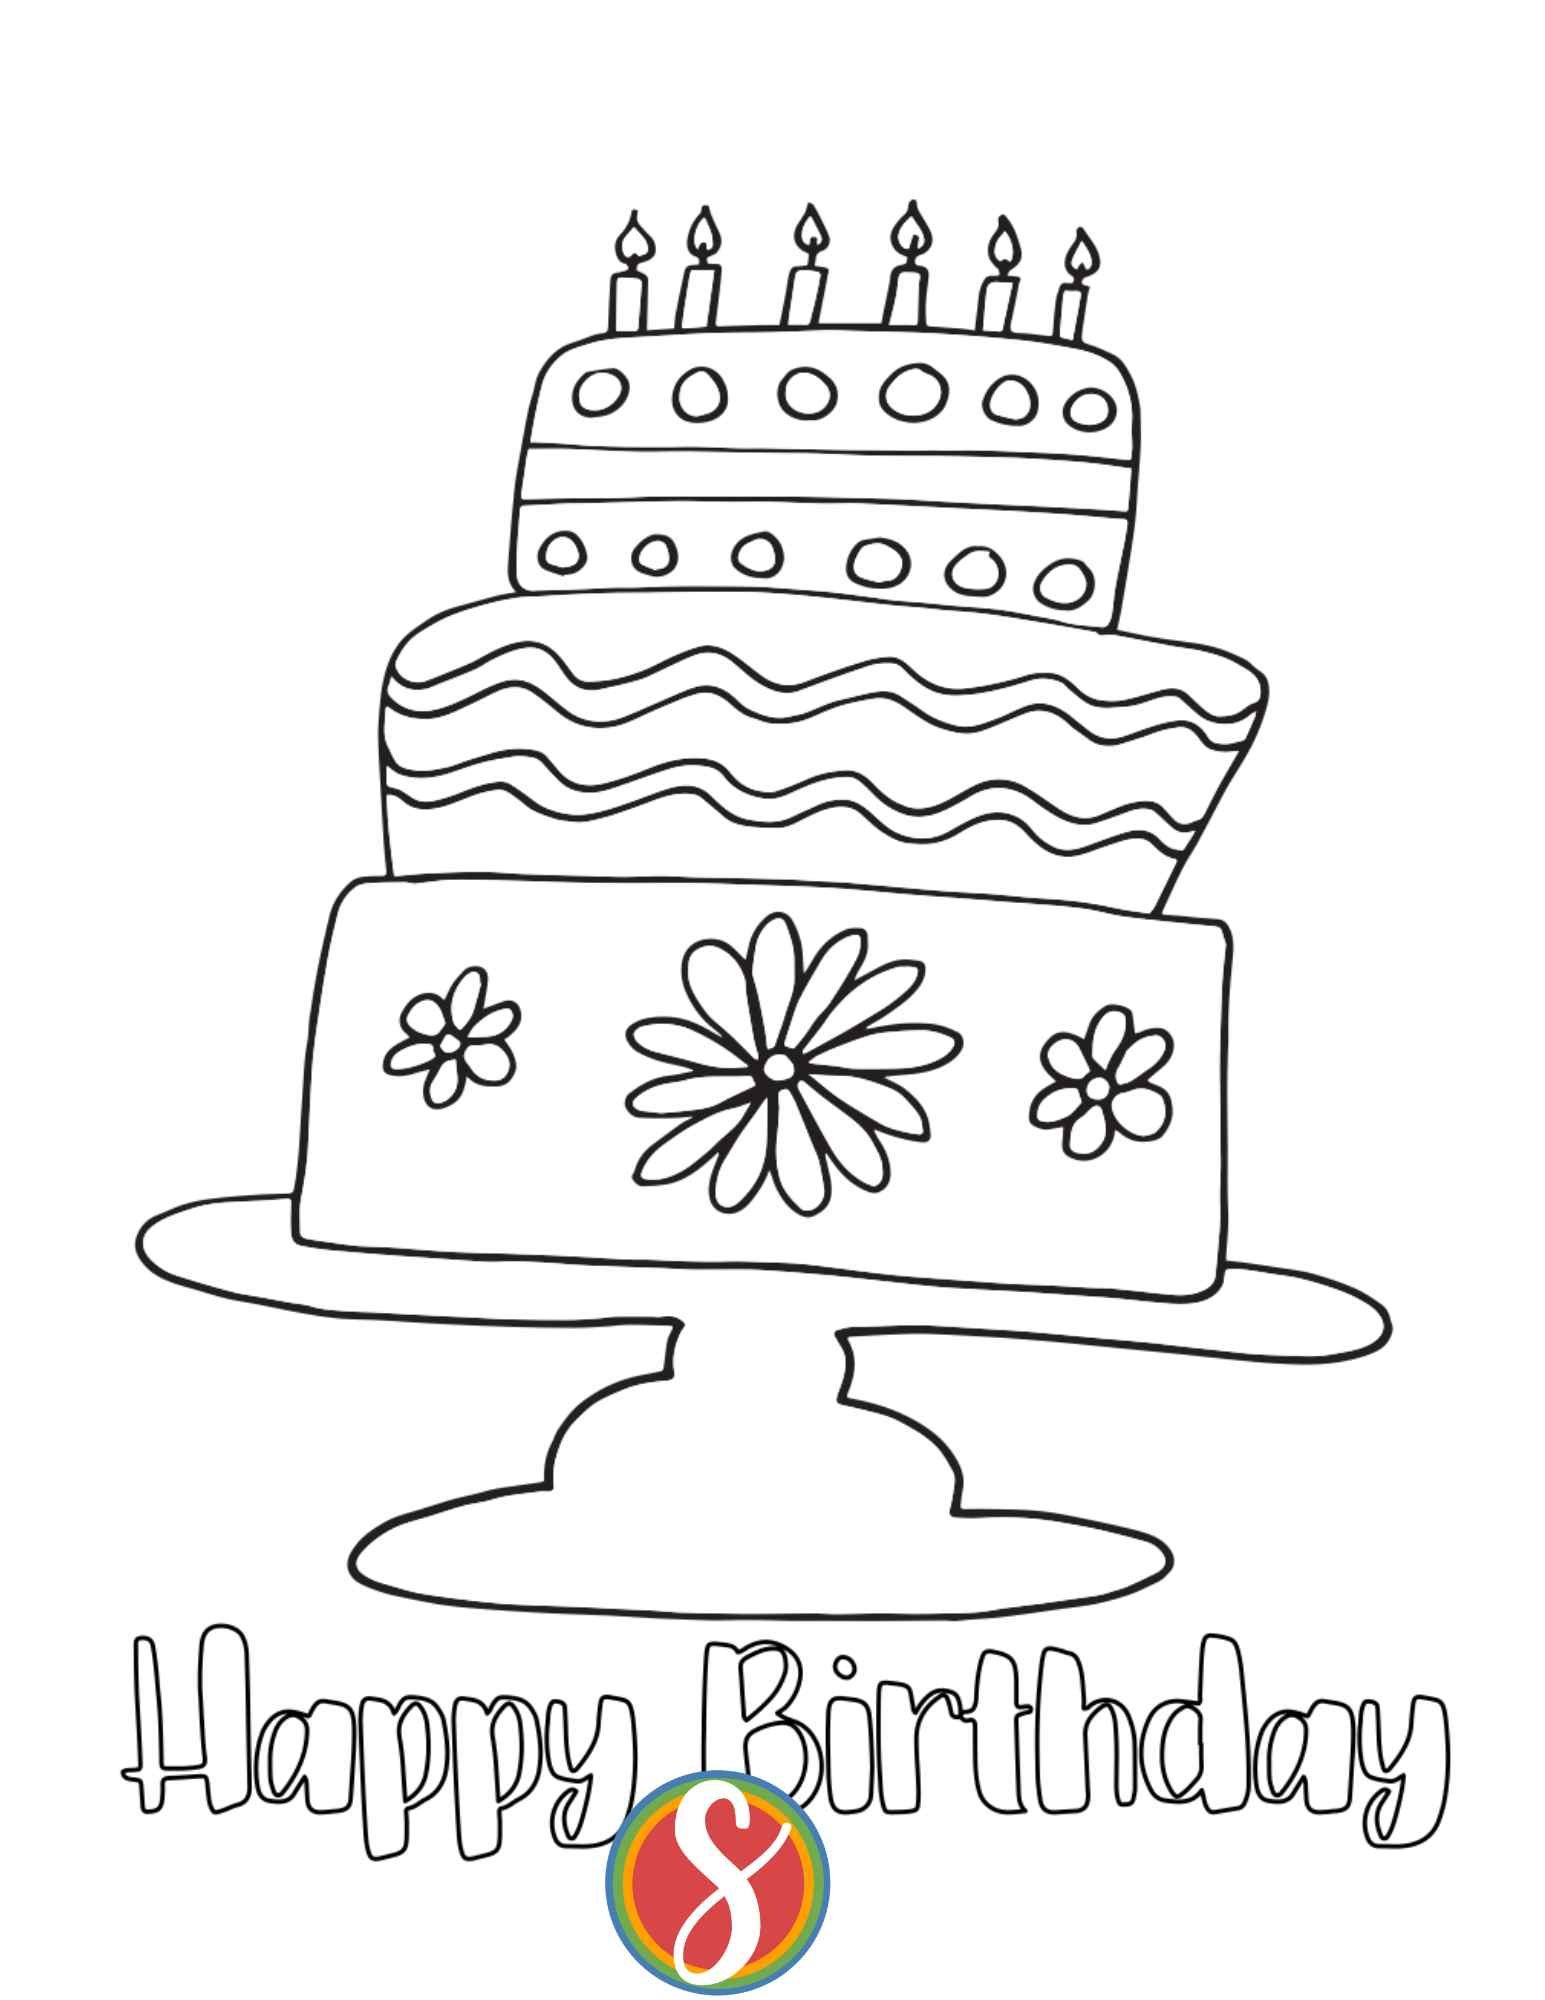 Free cake coloring pages â stevie doodles